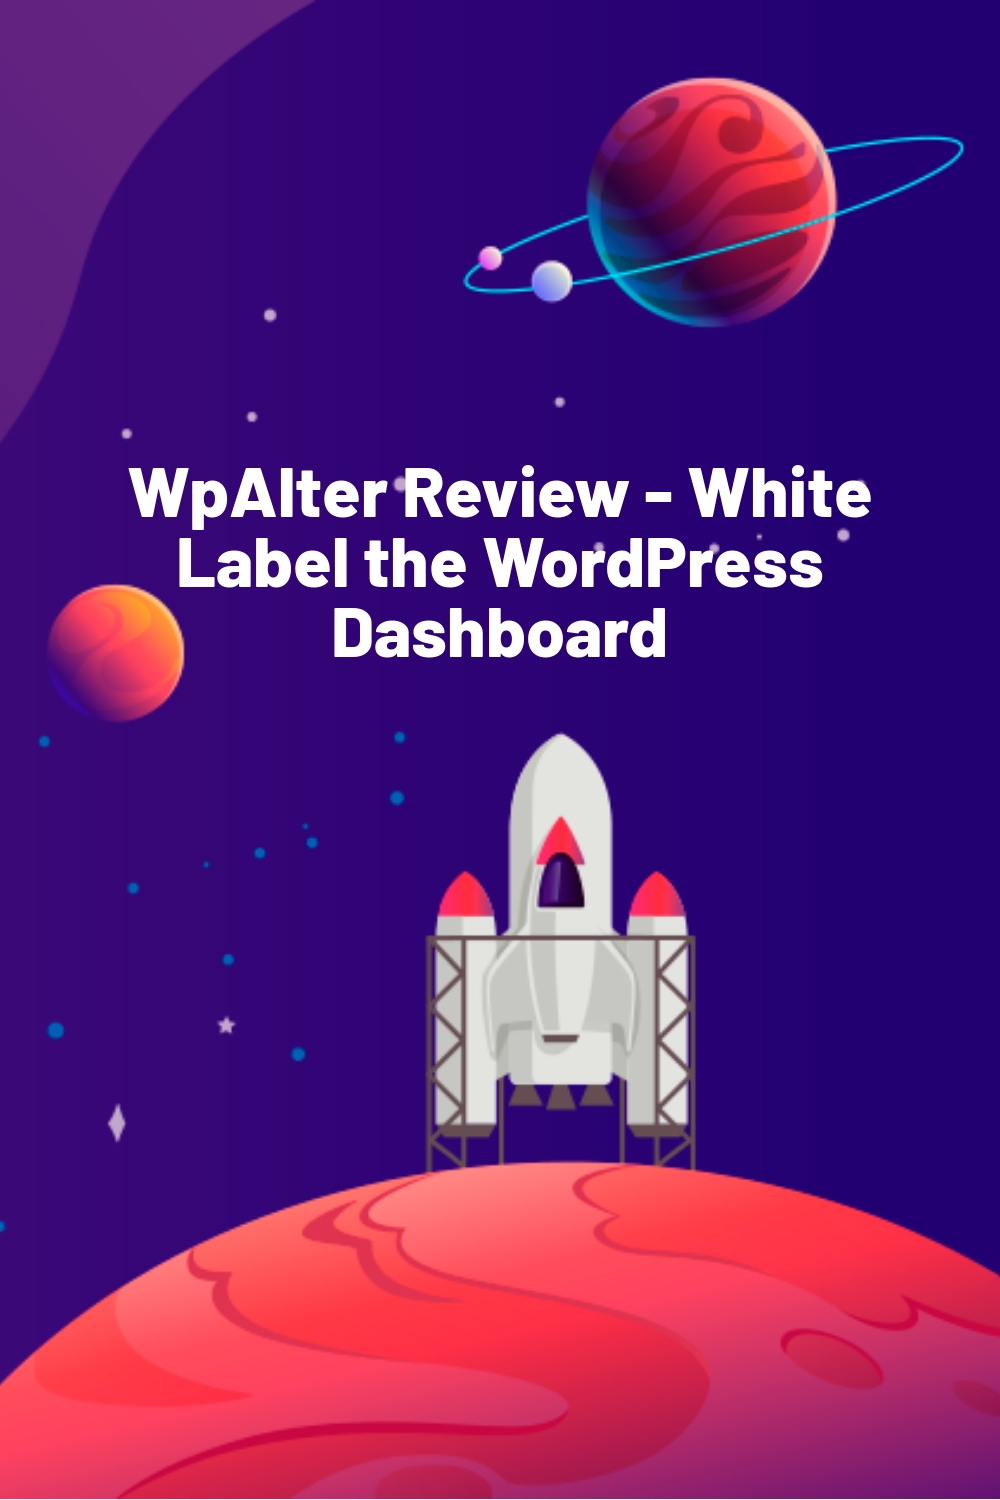 WpAlter Review – White Label the WordPress Dashboard